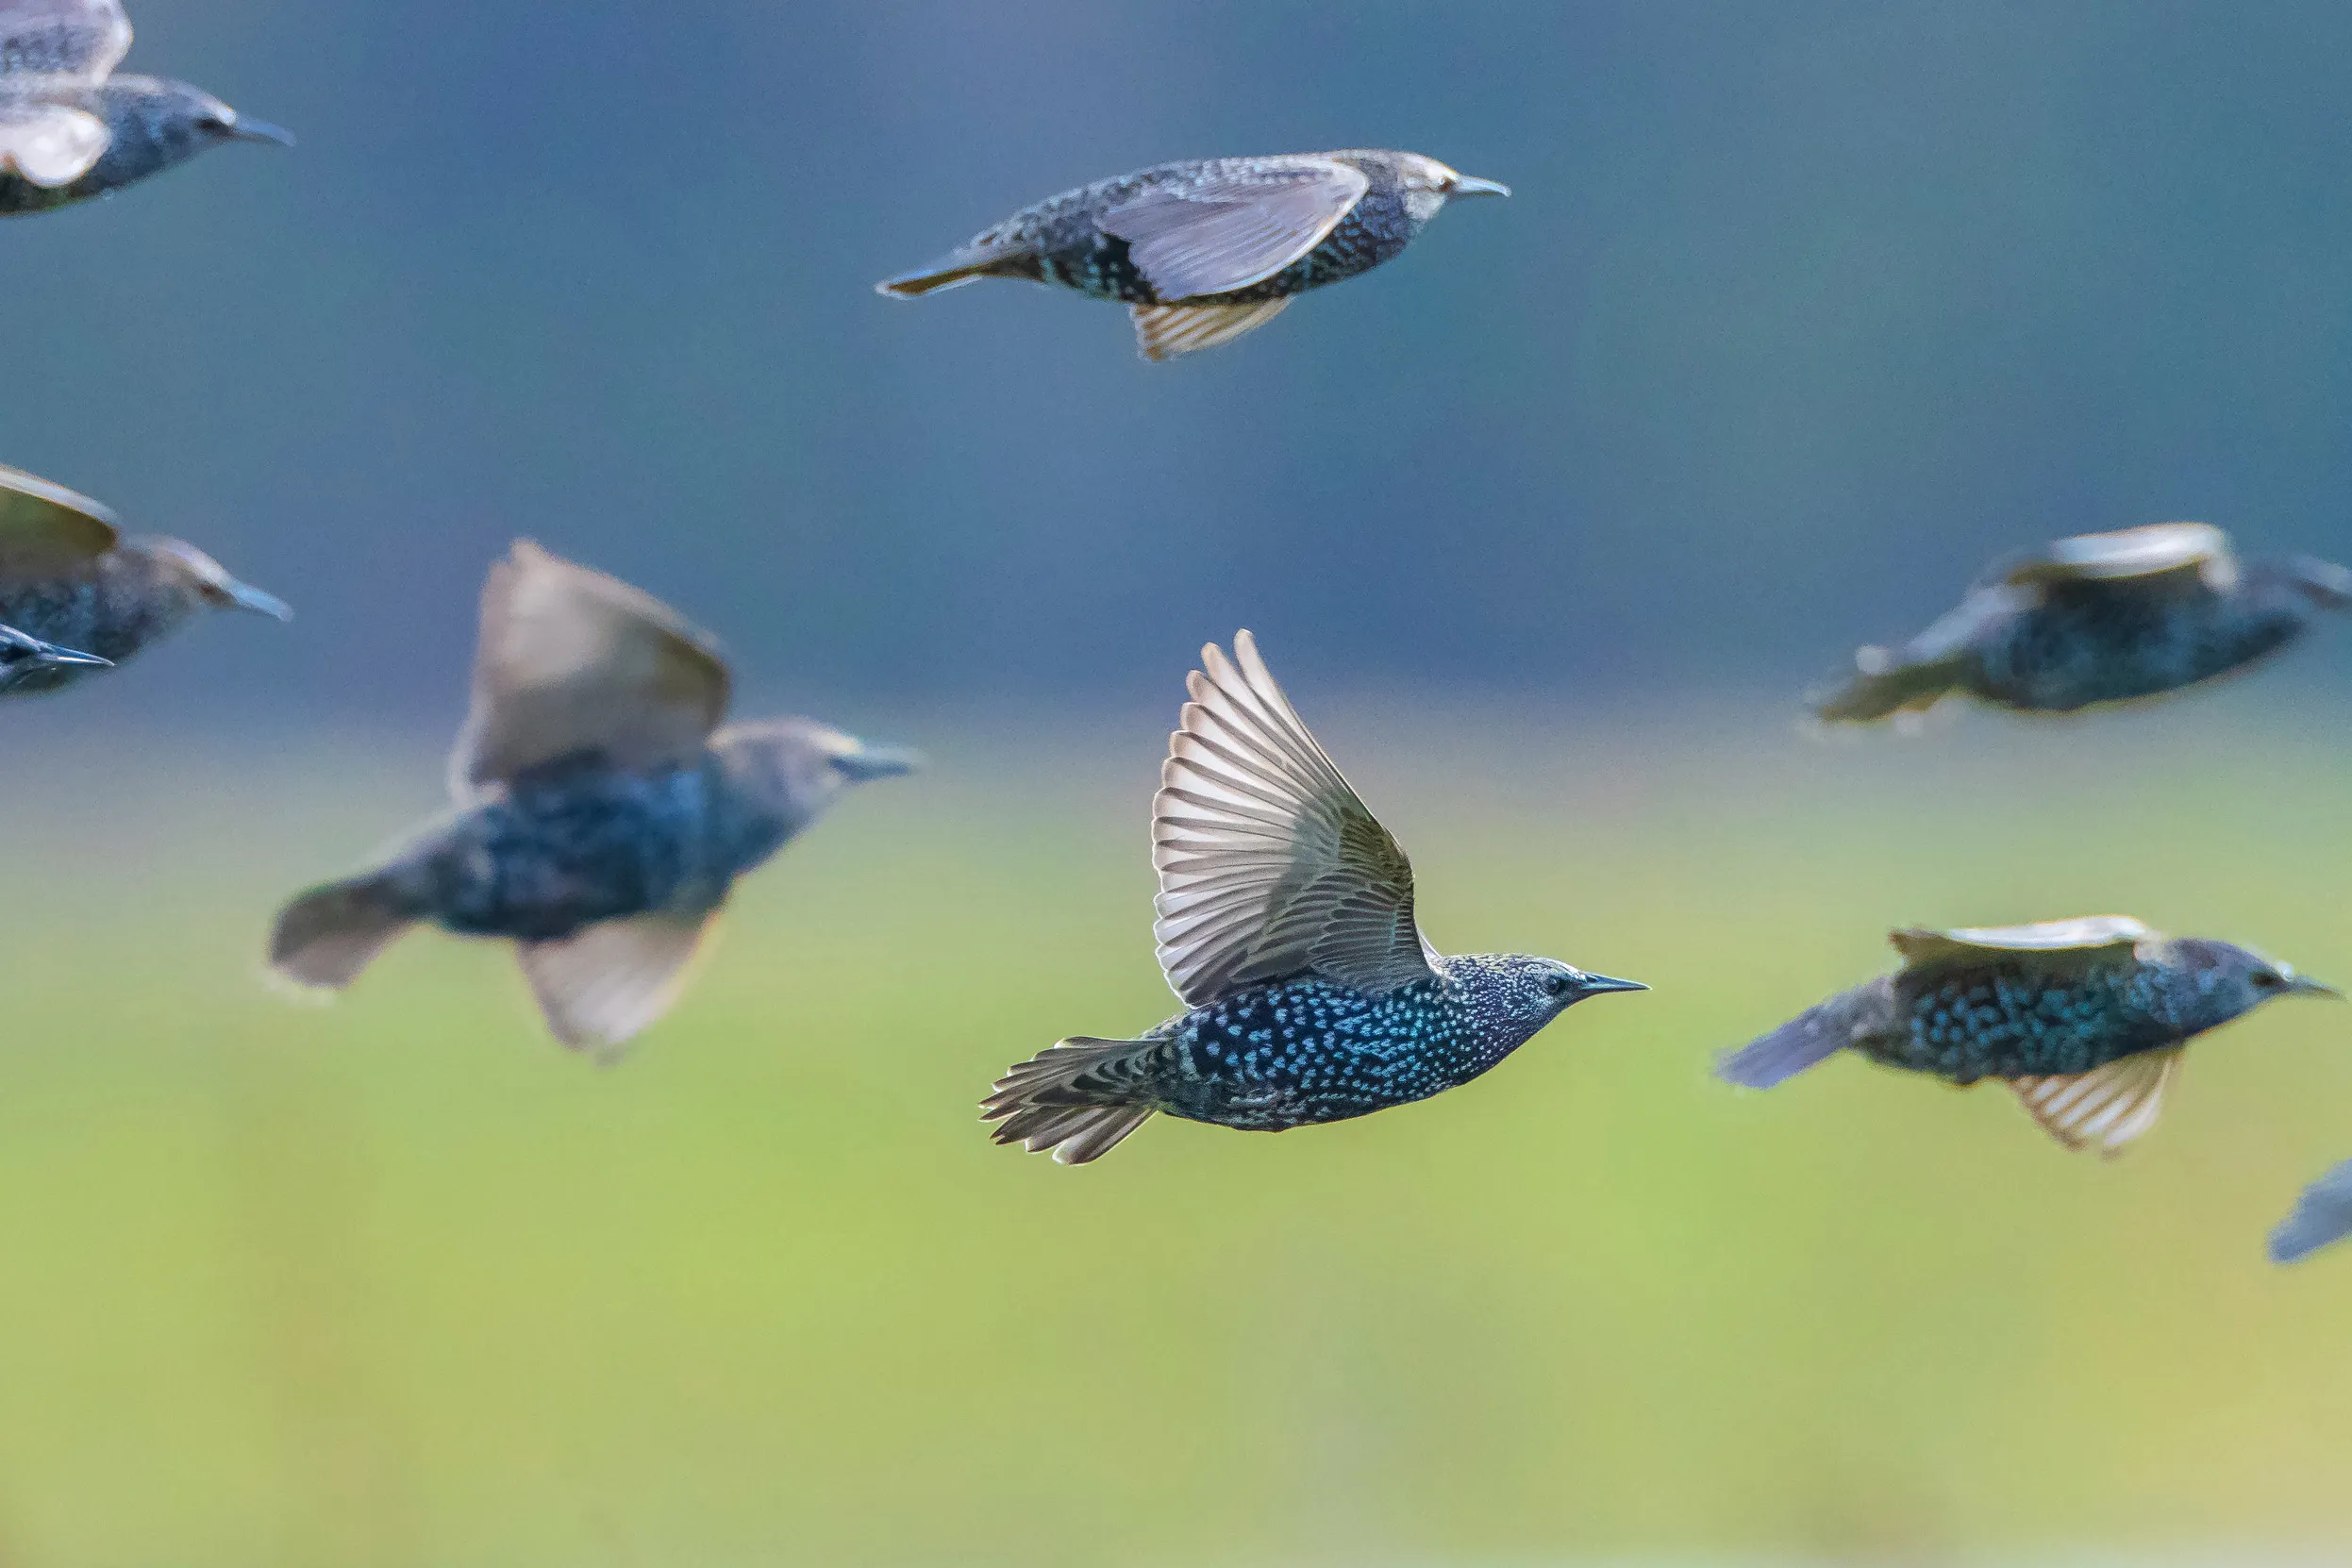 Close up of Starling in flight, surrounded by other flying Starlings